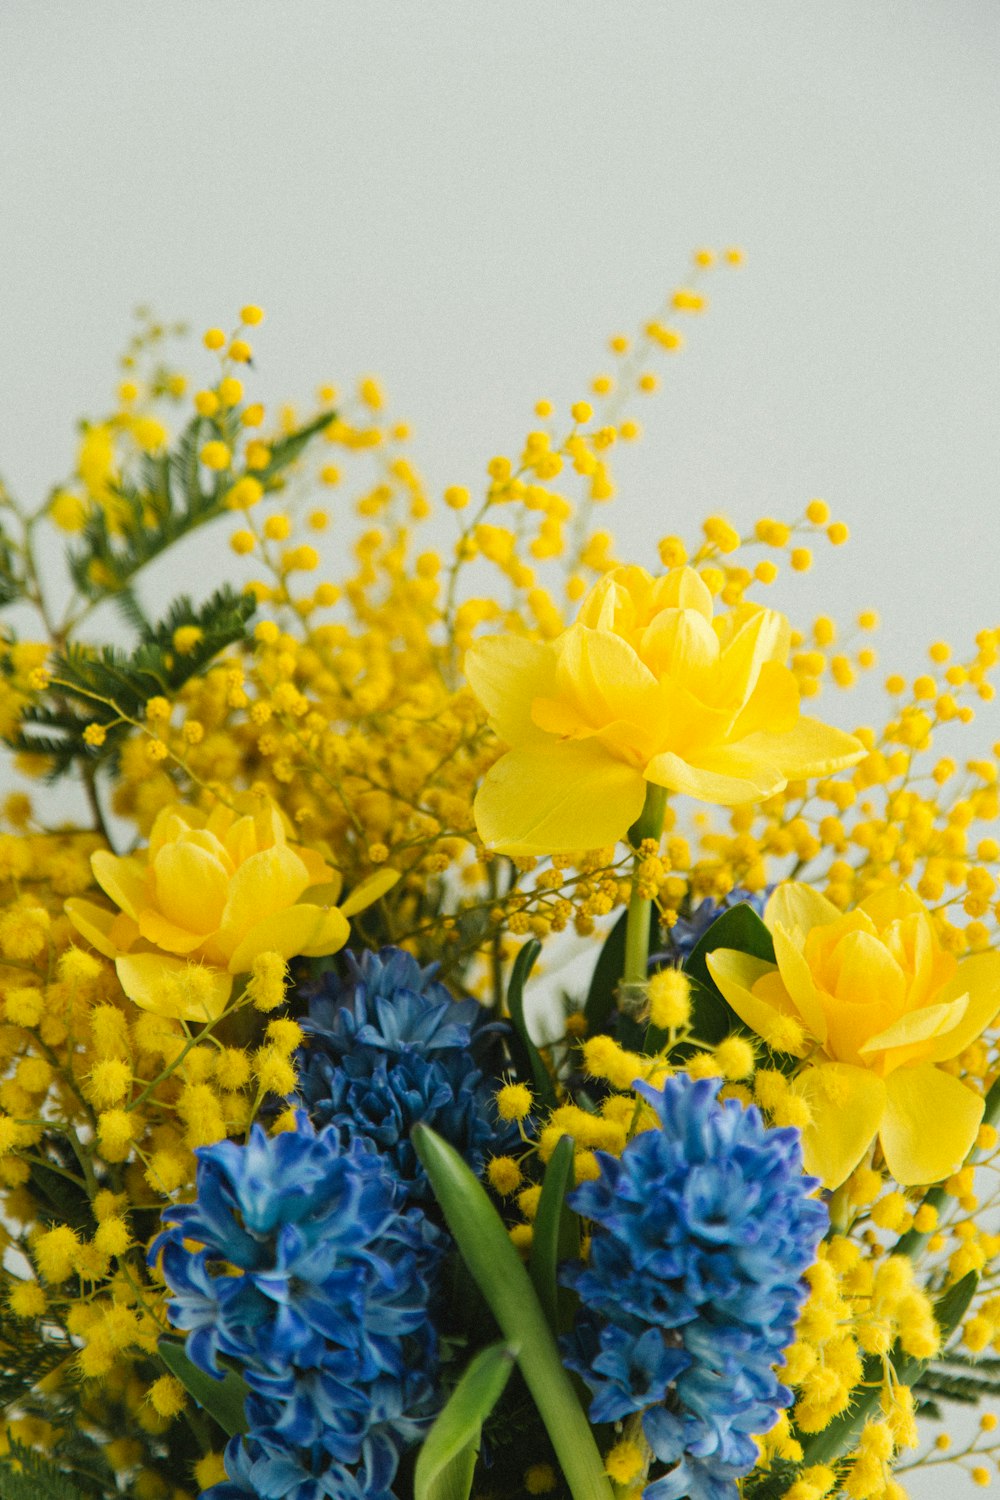 a vase filled with yellow and blue flowers